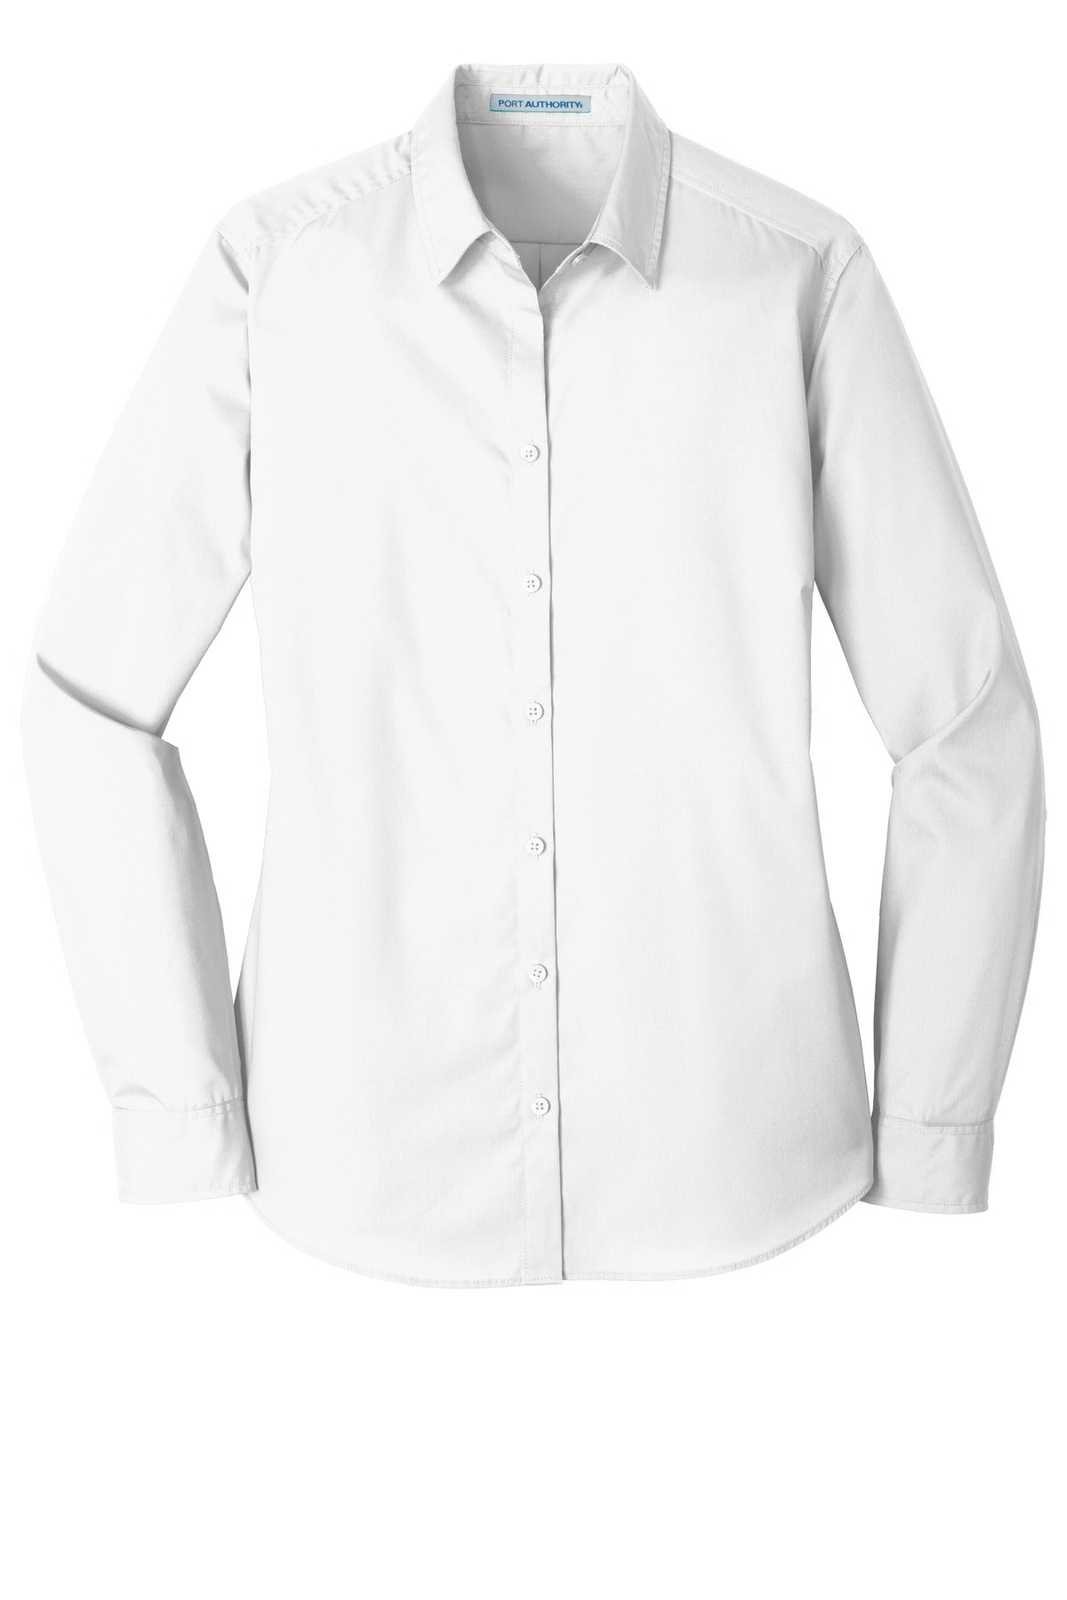 Port Authority LW100 Ladies Long Sleeve Carefree Poplin Shirt - White - HIT a Double - 5